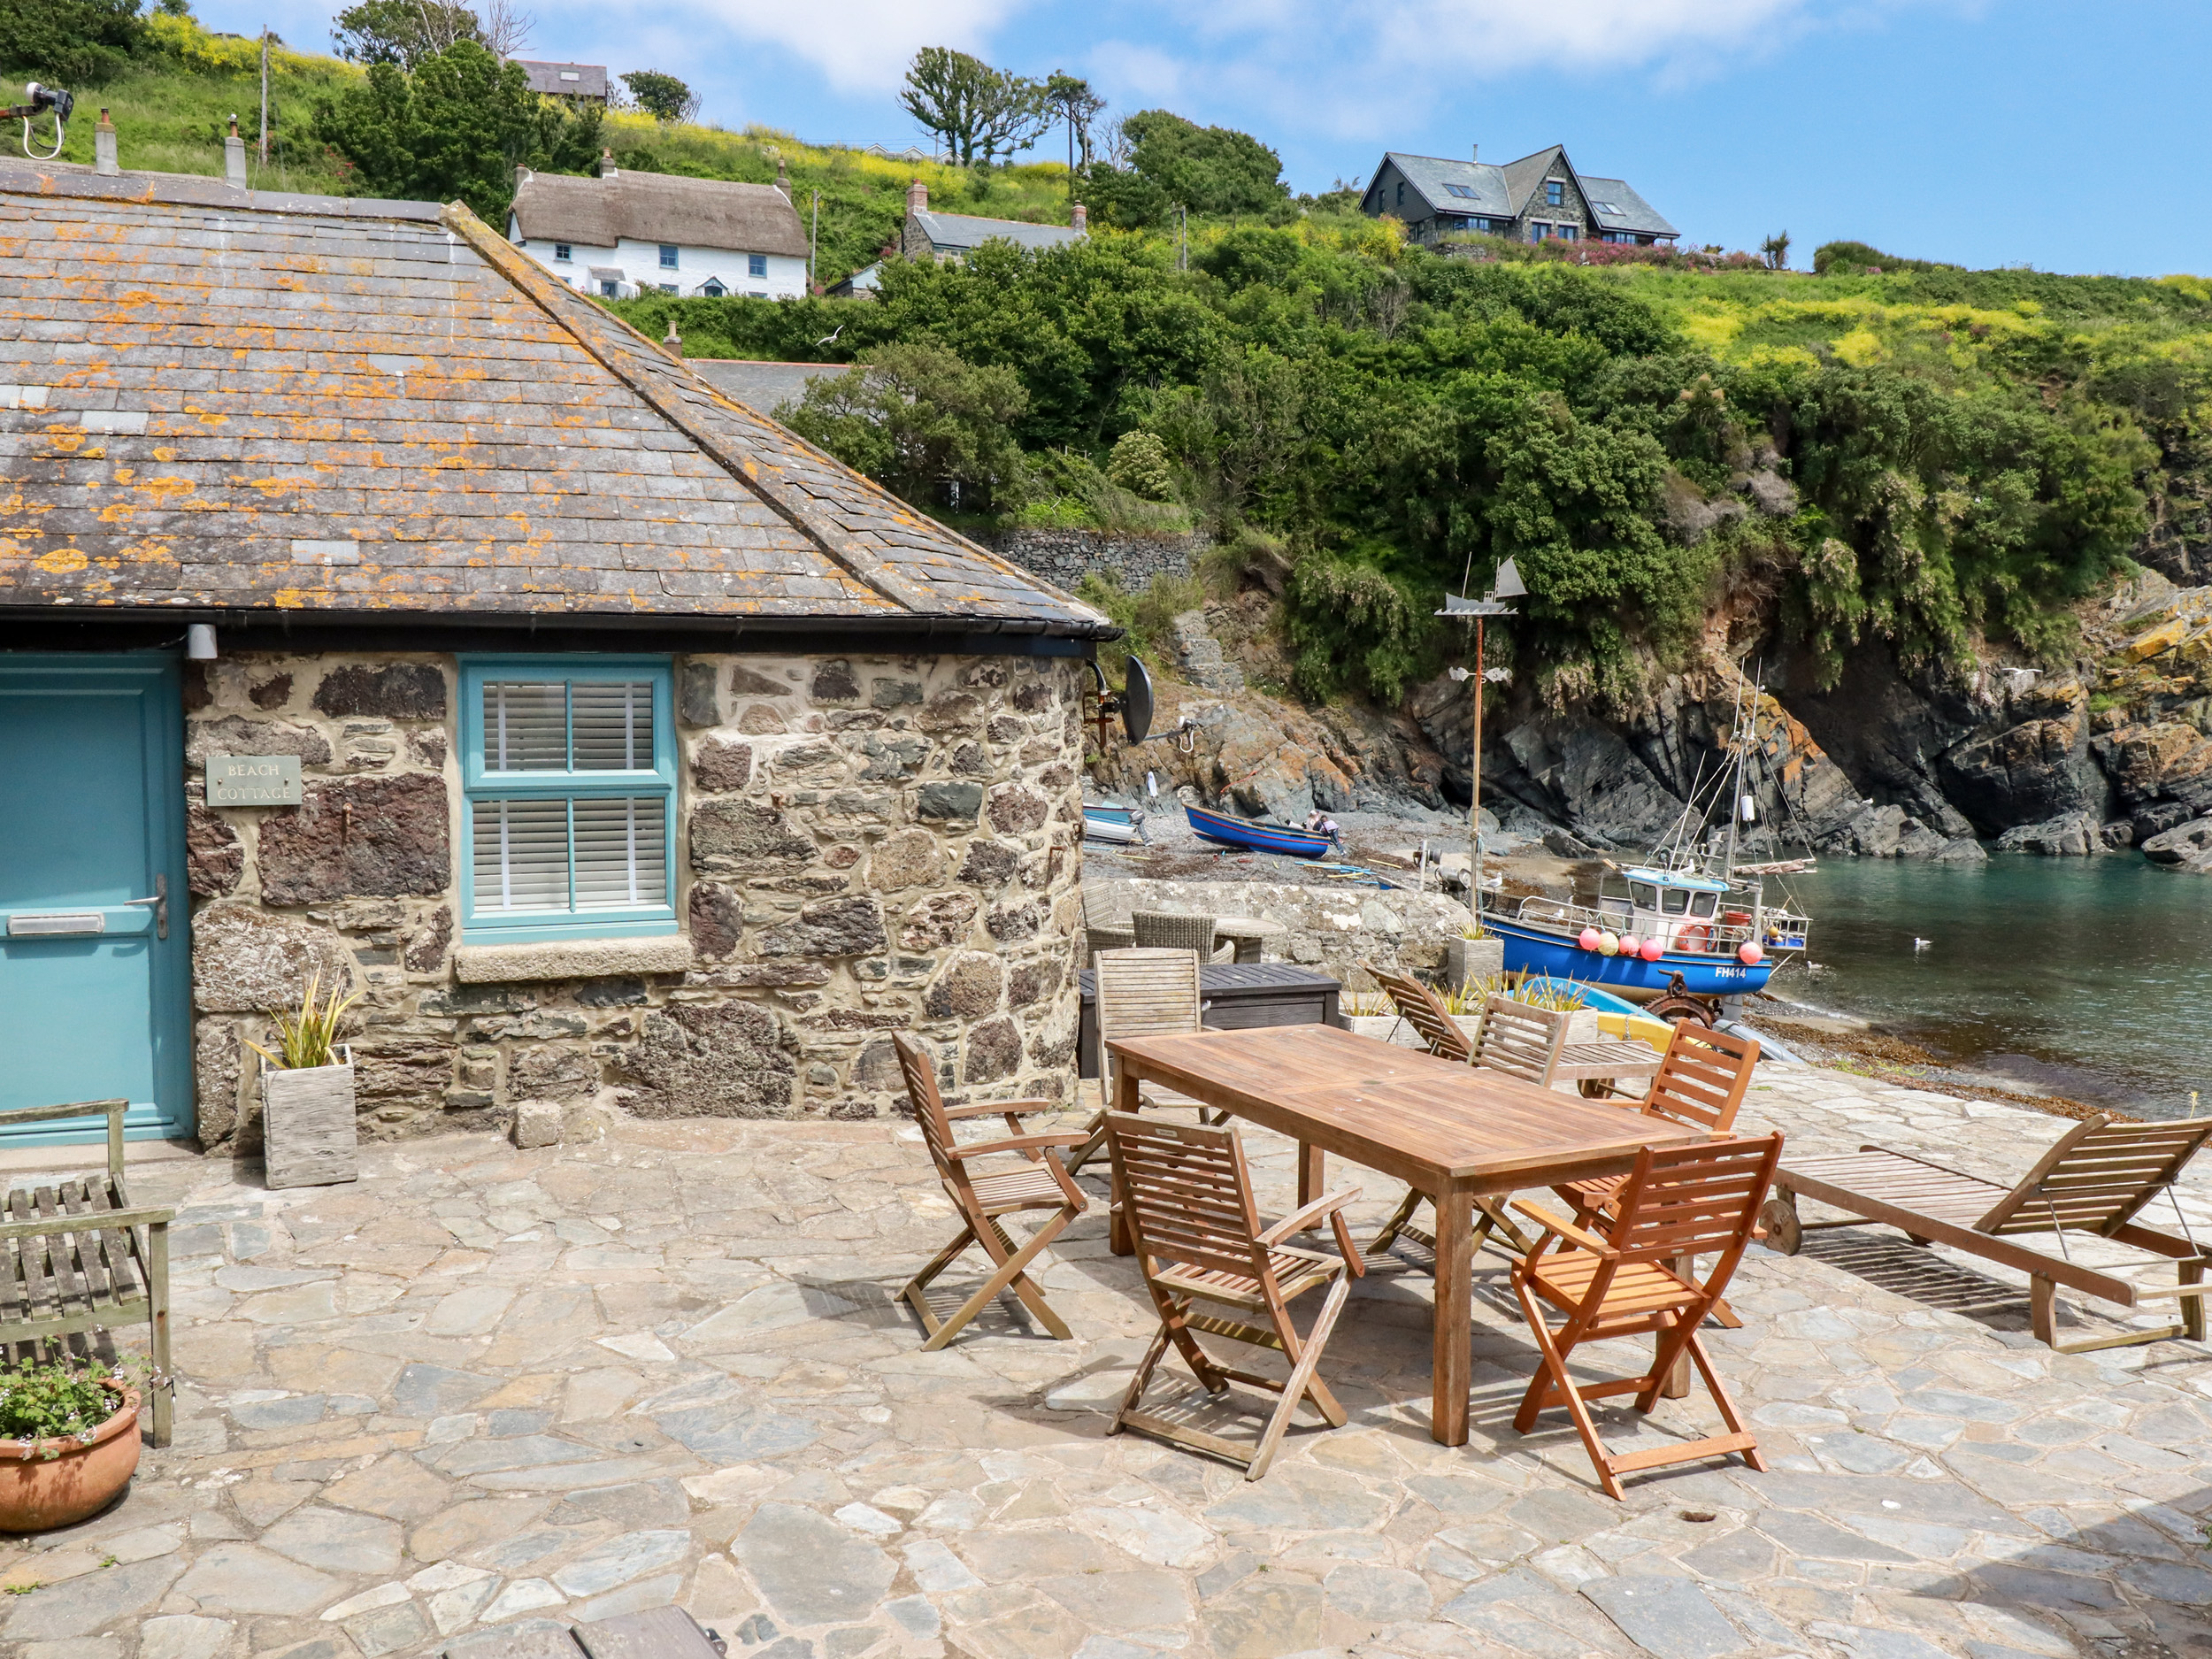 Stonebuilt, sea front property in Cornwall with outdoor furniture